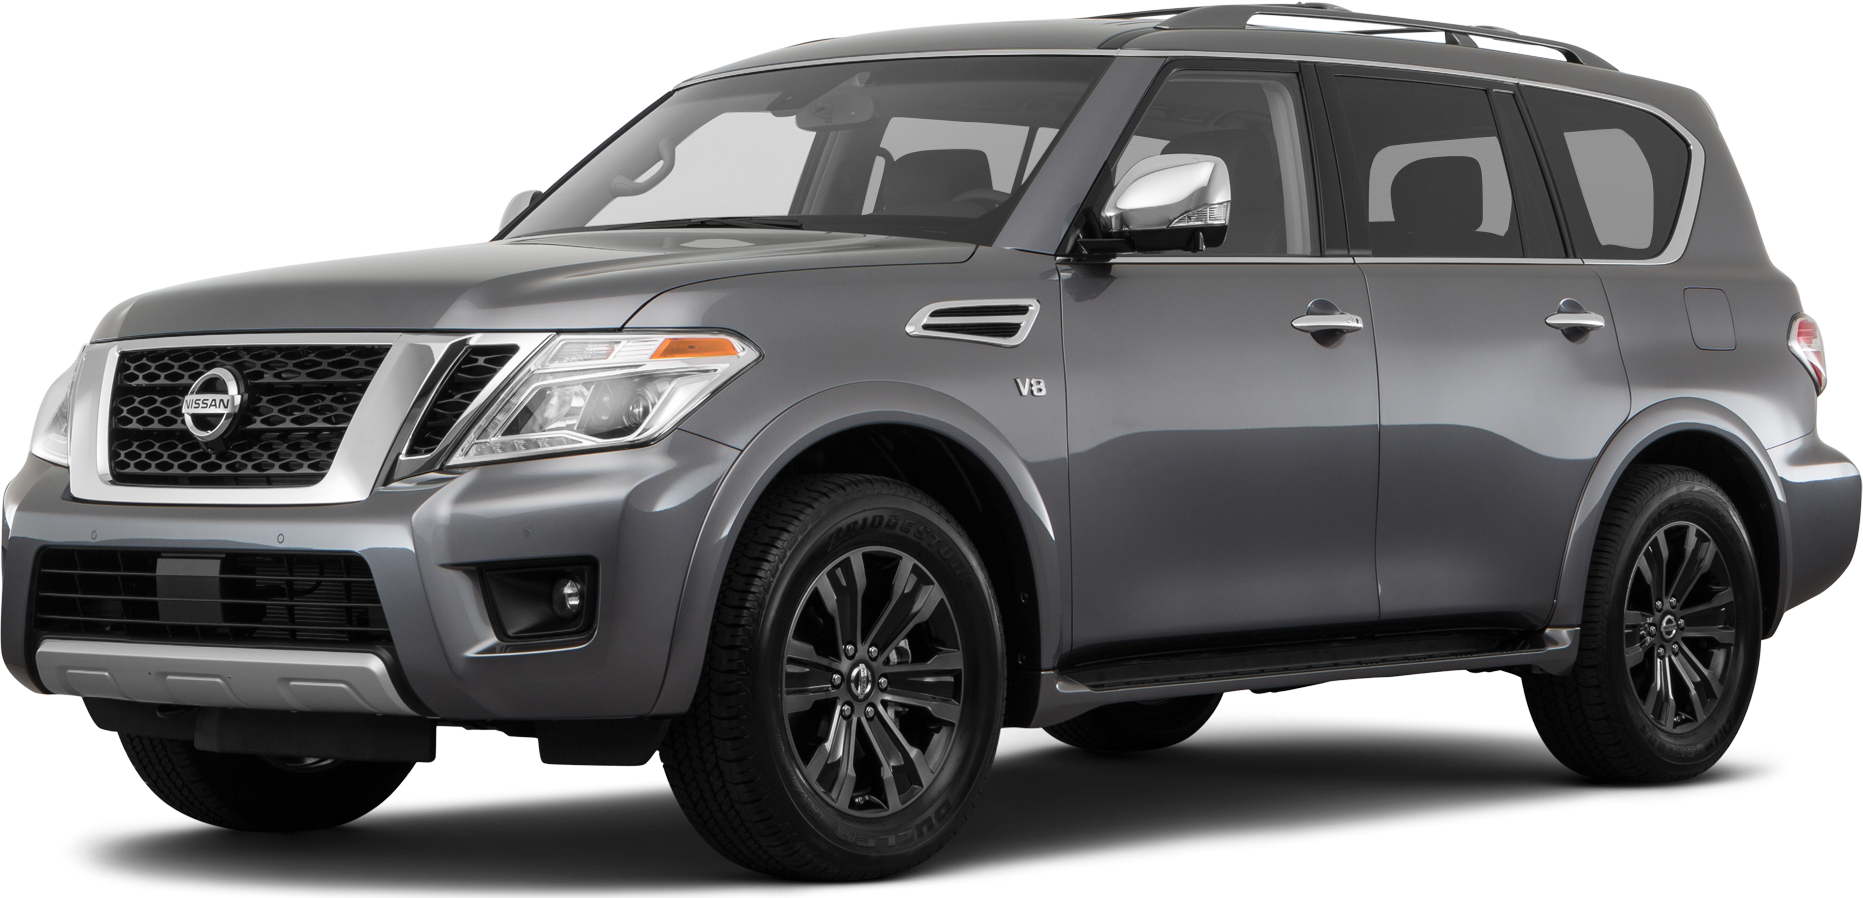 https://file.kelleybluebookimages.com/kbb/base/evox/CP/11441/2017-Nissan-Armada-front_11441_032_1863x898_KAD_cropped.png